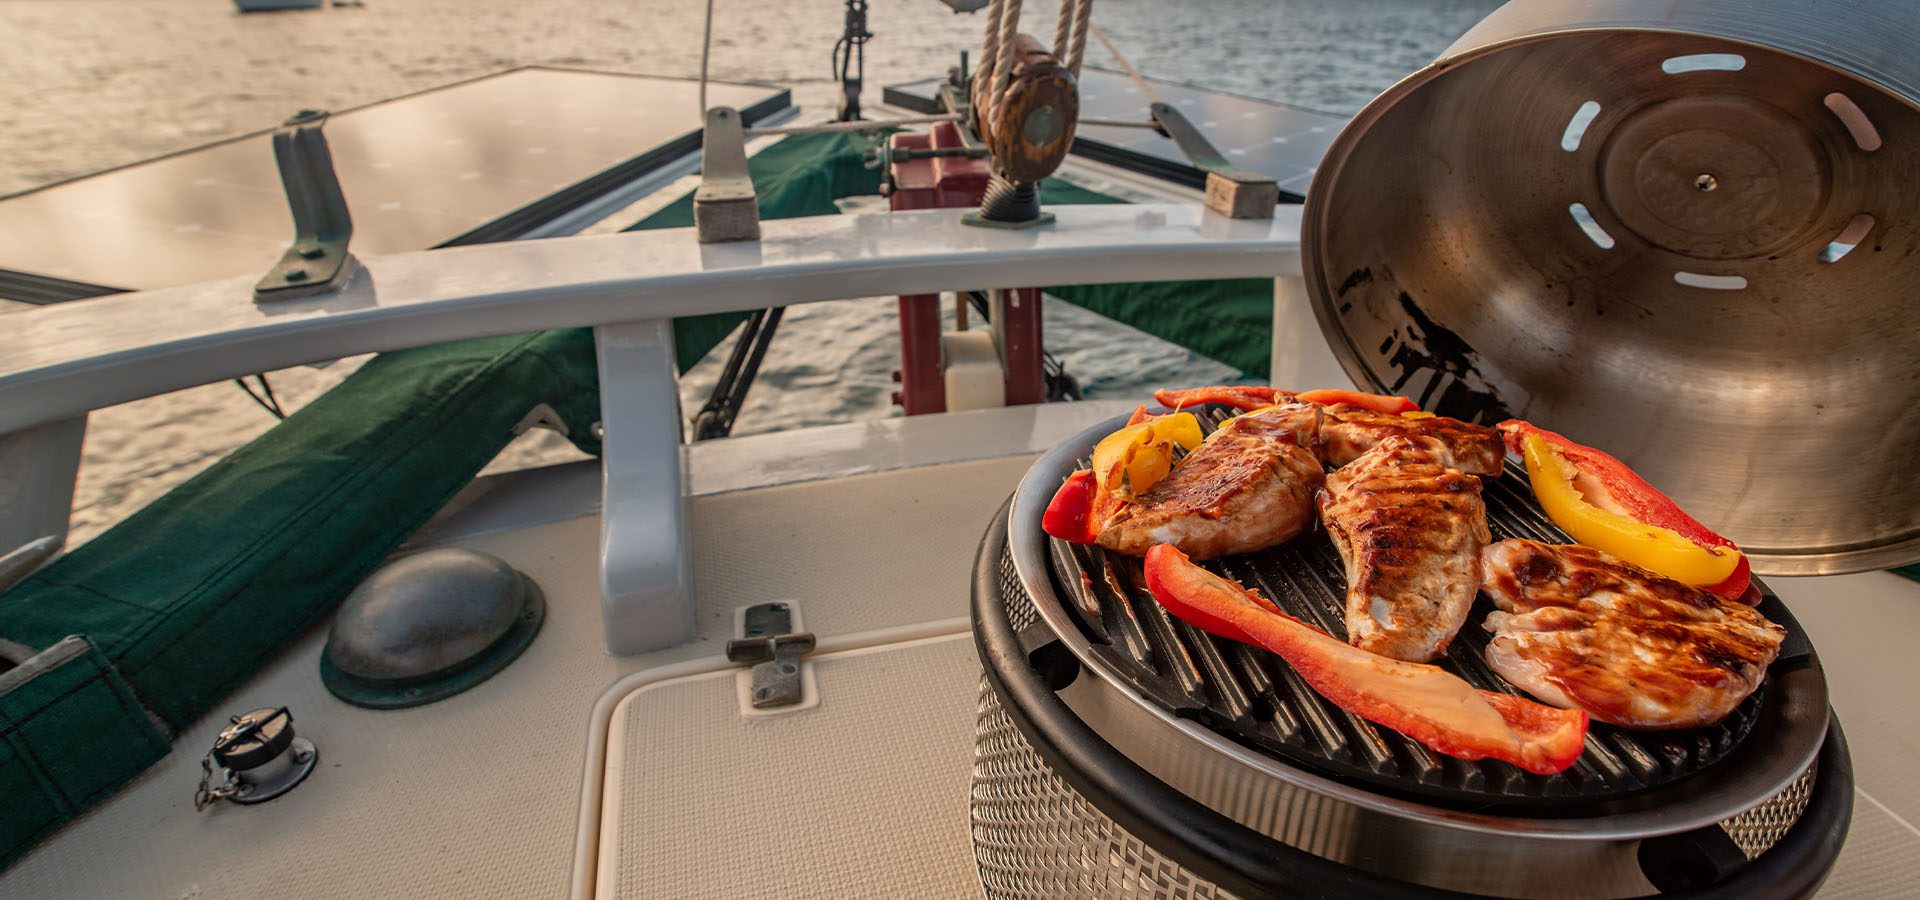 Feed a Crowd With Your Versatile Portable Camping Grill - Blog